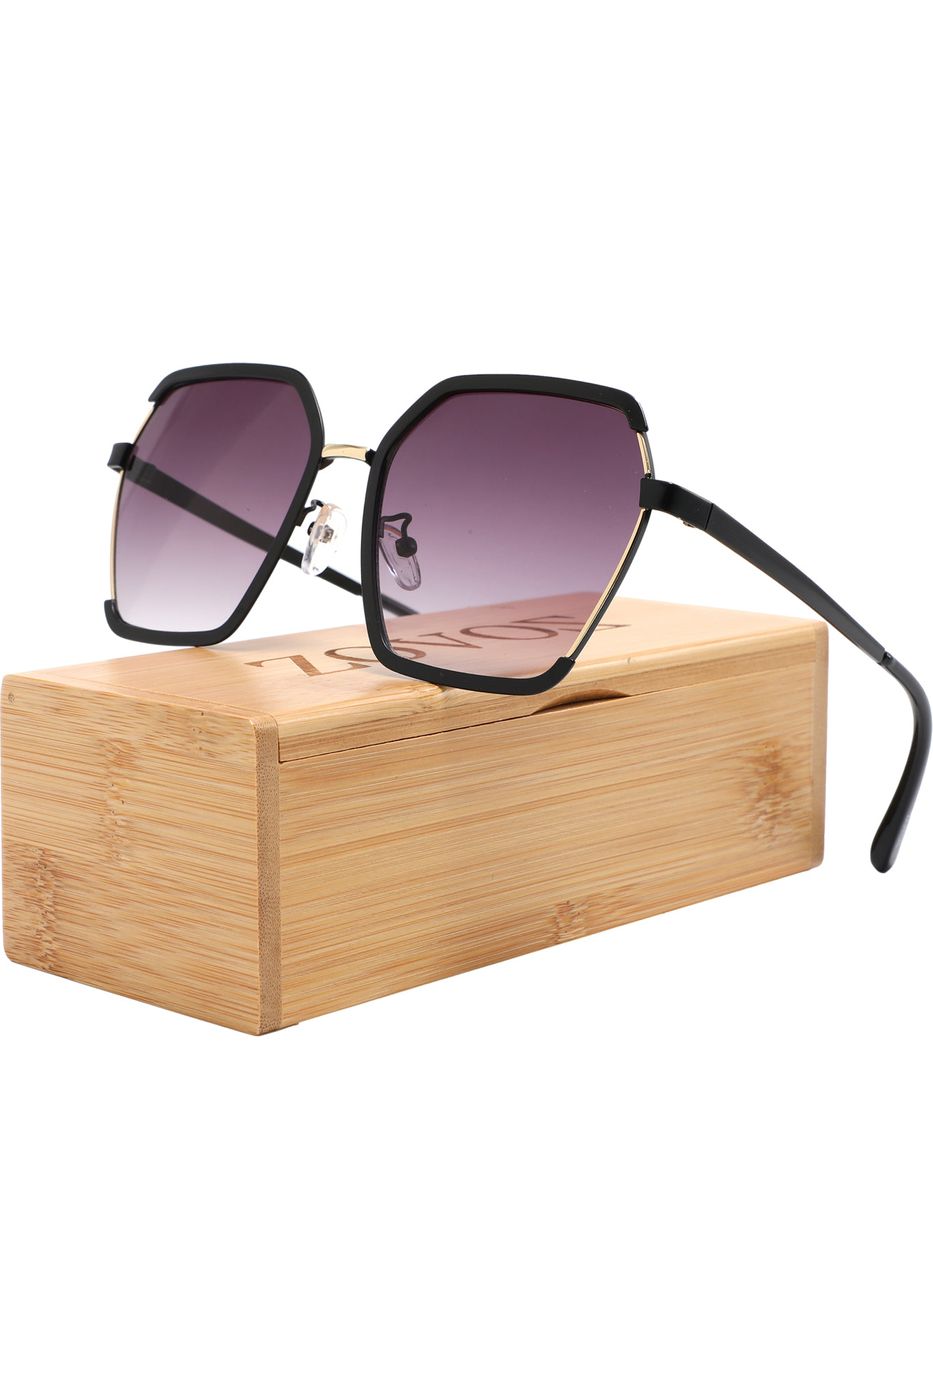 Zovoz Lilly Sonnenbrille